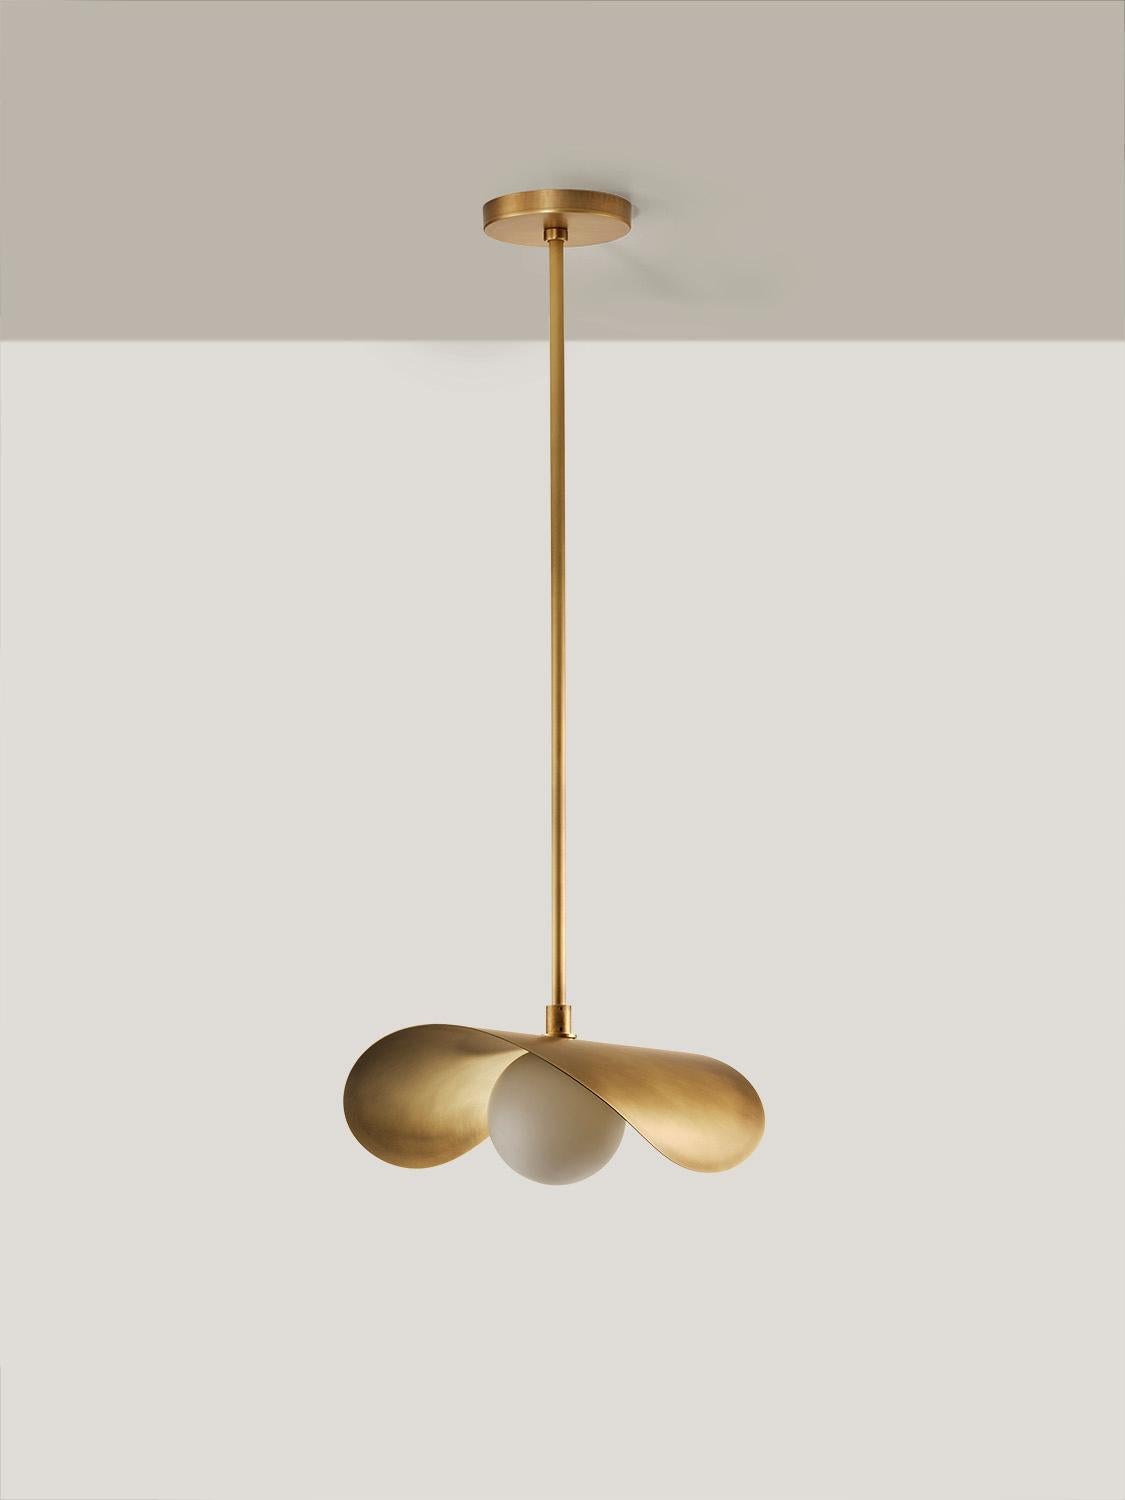 PETITE MONTERA Pendant, biomorphic form in Brass & Glass, Blueprint Lighting In New Condition For Sale In New York, NY